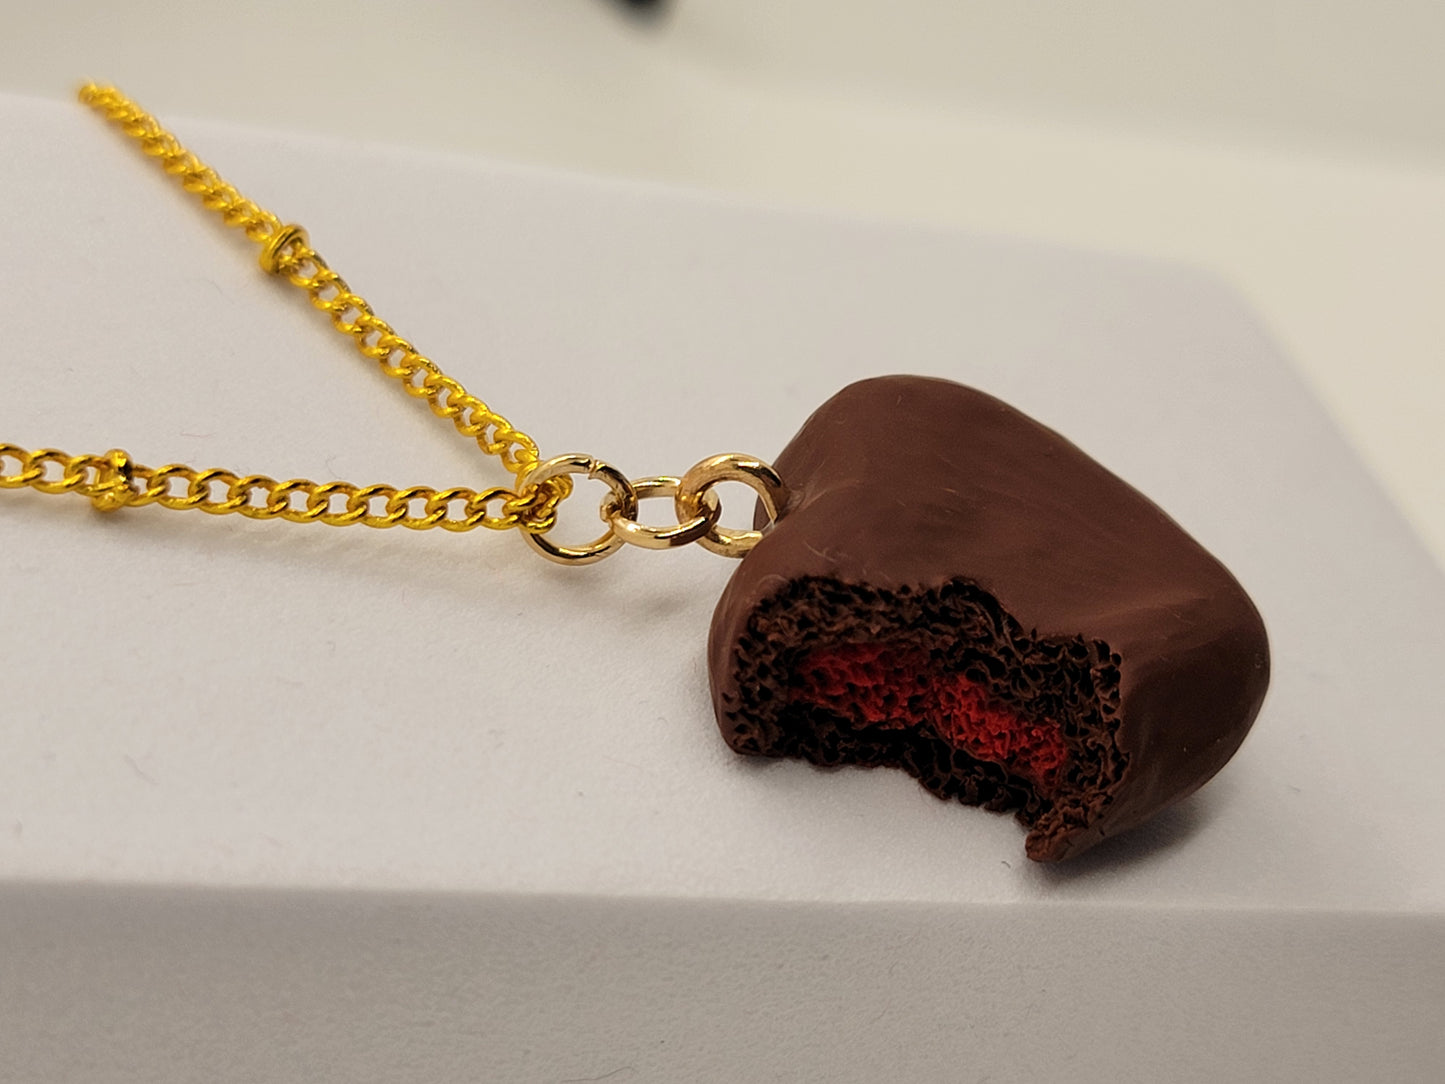 Chocolate heart bite necklace